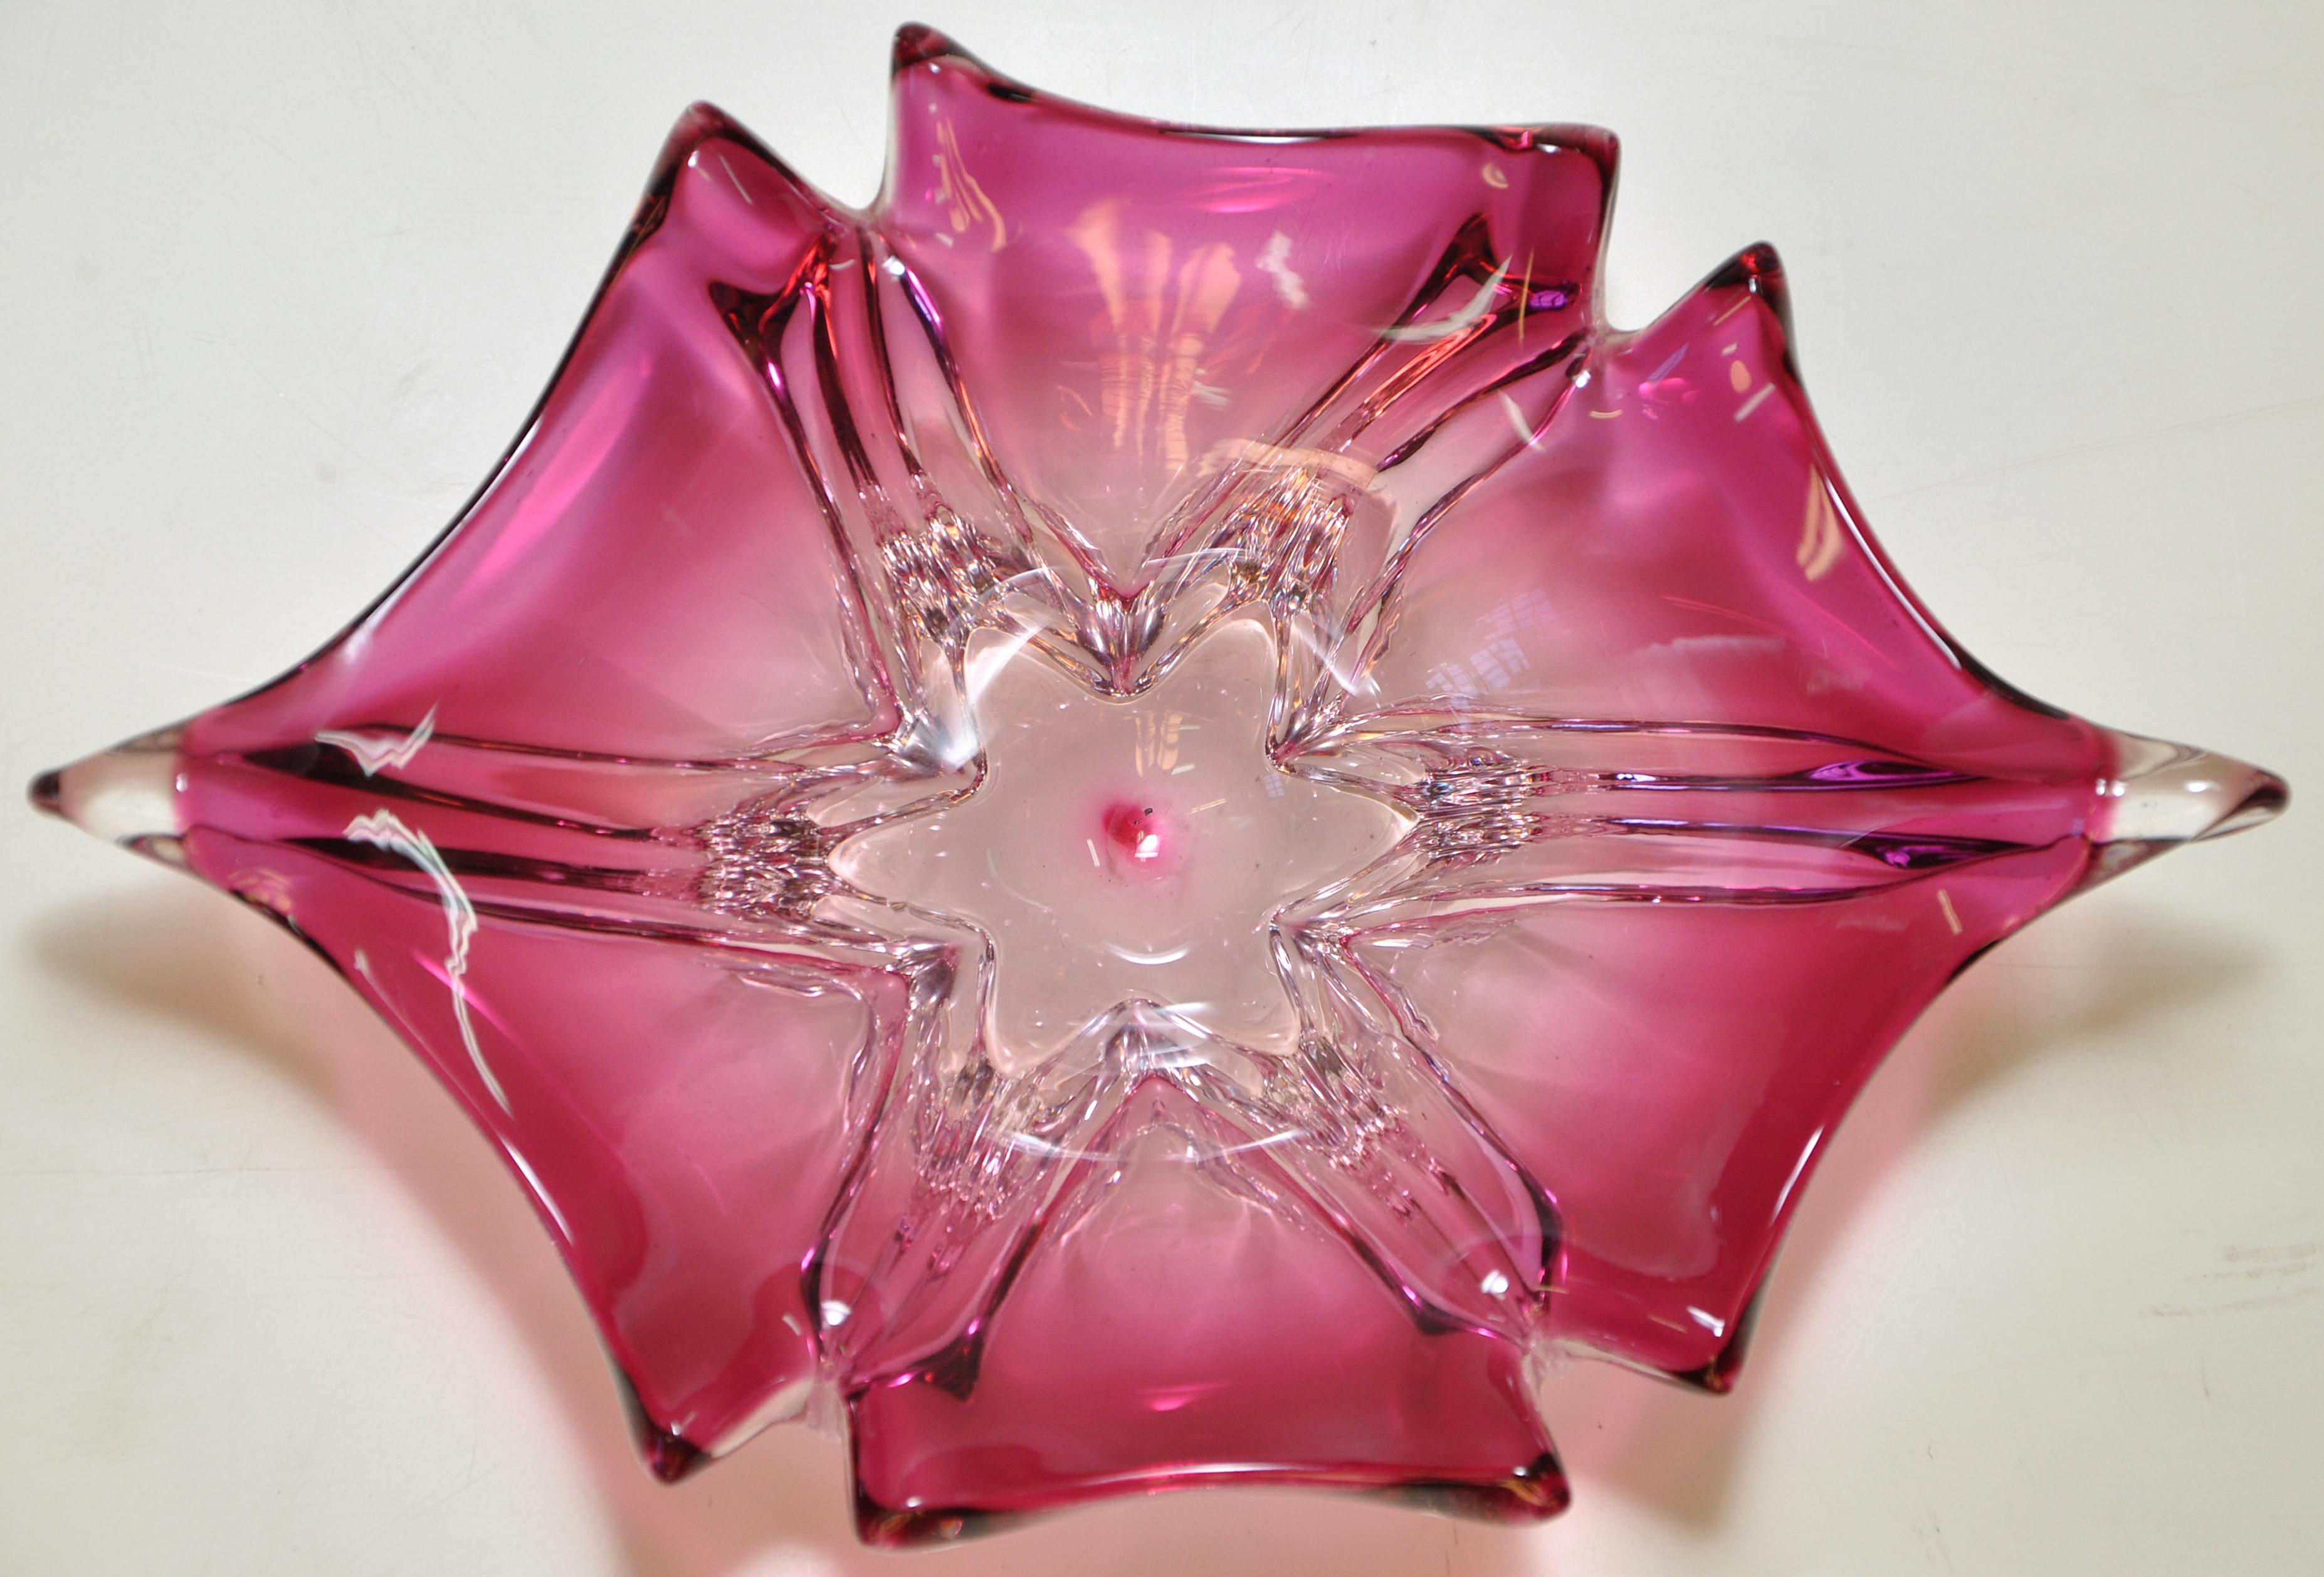 Stunning Vintage Pink Art Glass Bowl Italian 

A stunning vintage piece of art glass in a strong pink. This piece is wonderful as it would look great matched with antique or Mid-Century Modern furniture and yet it would fit perfectly into a